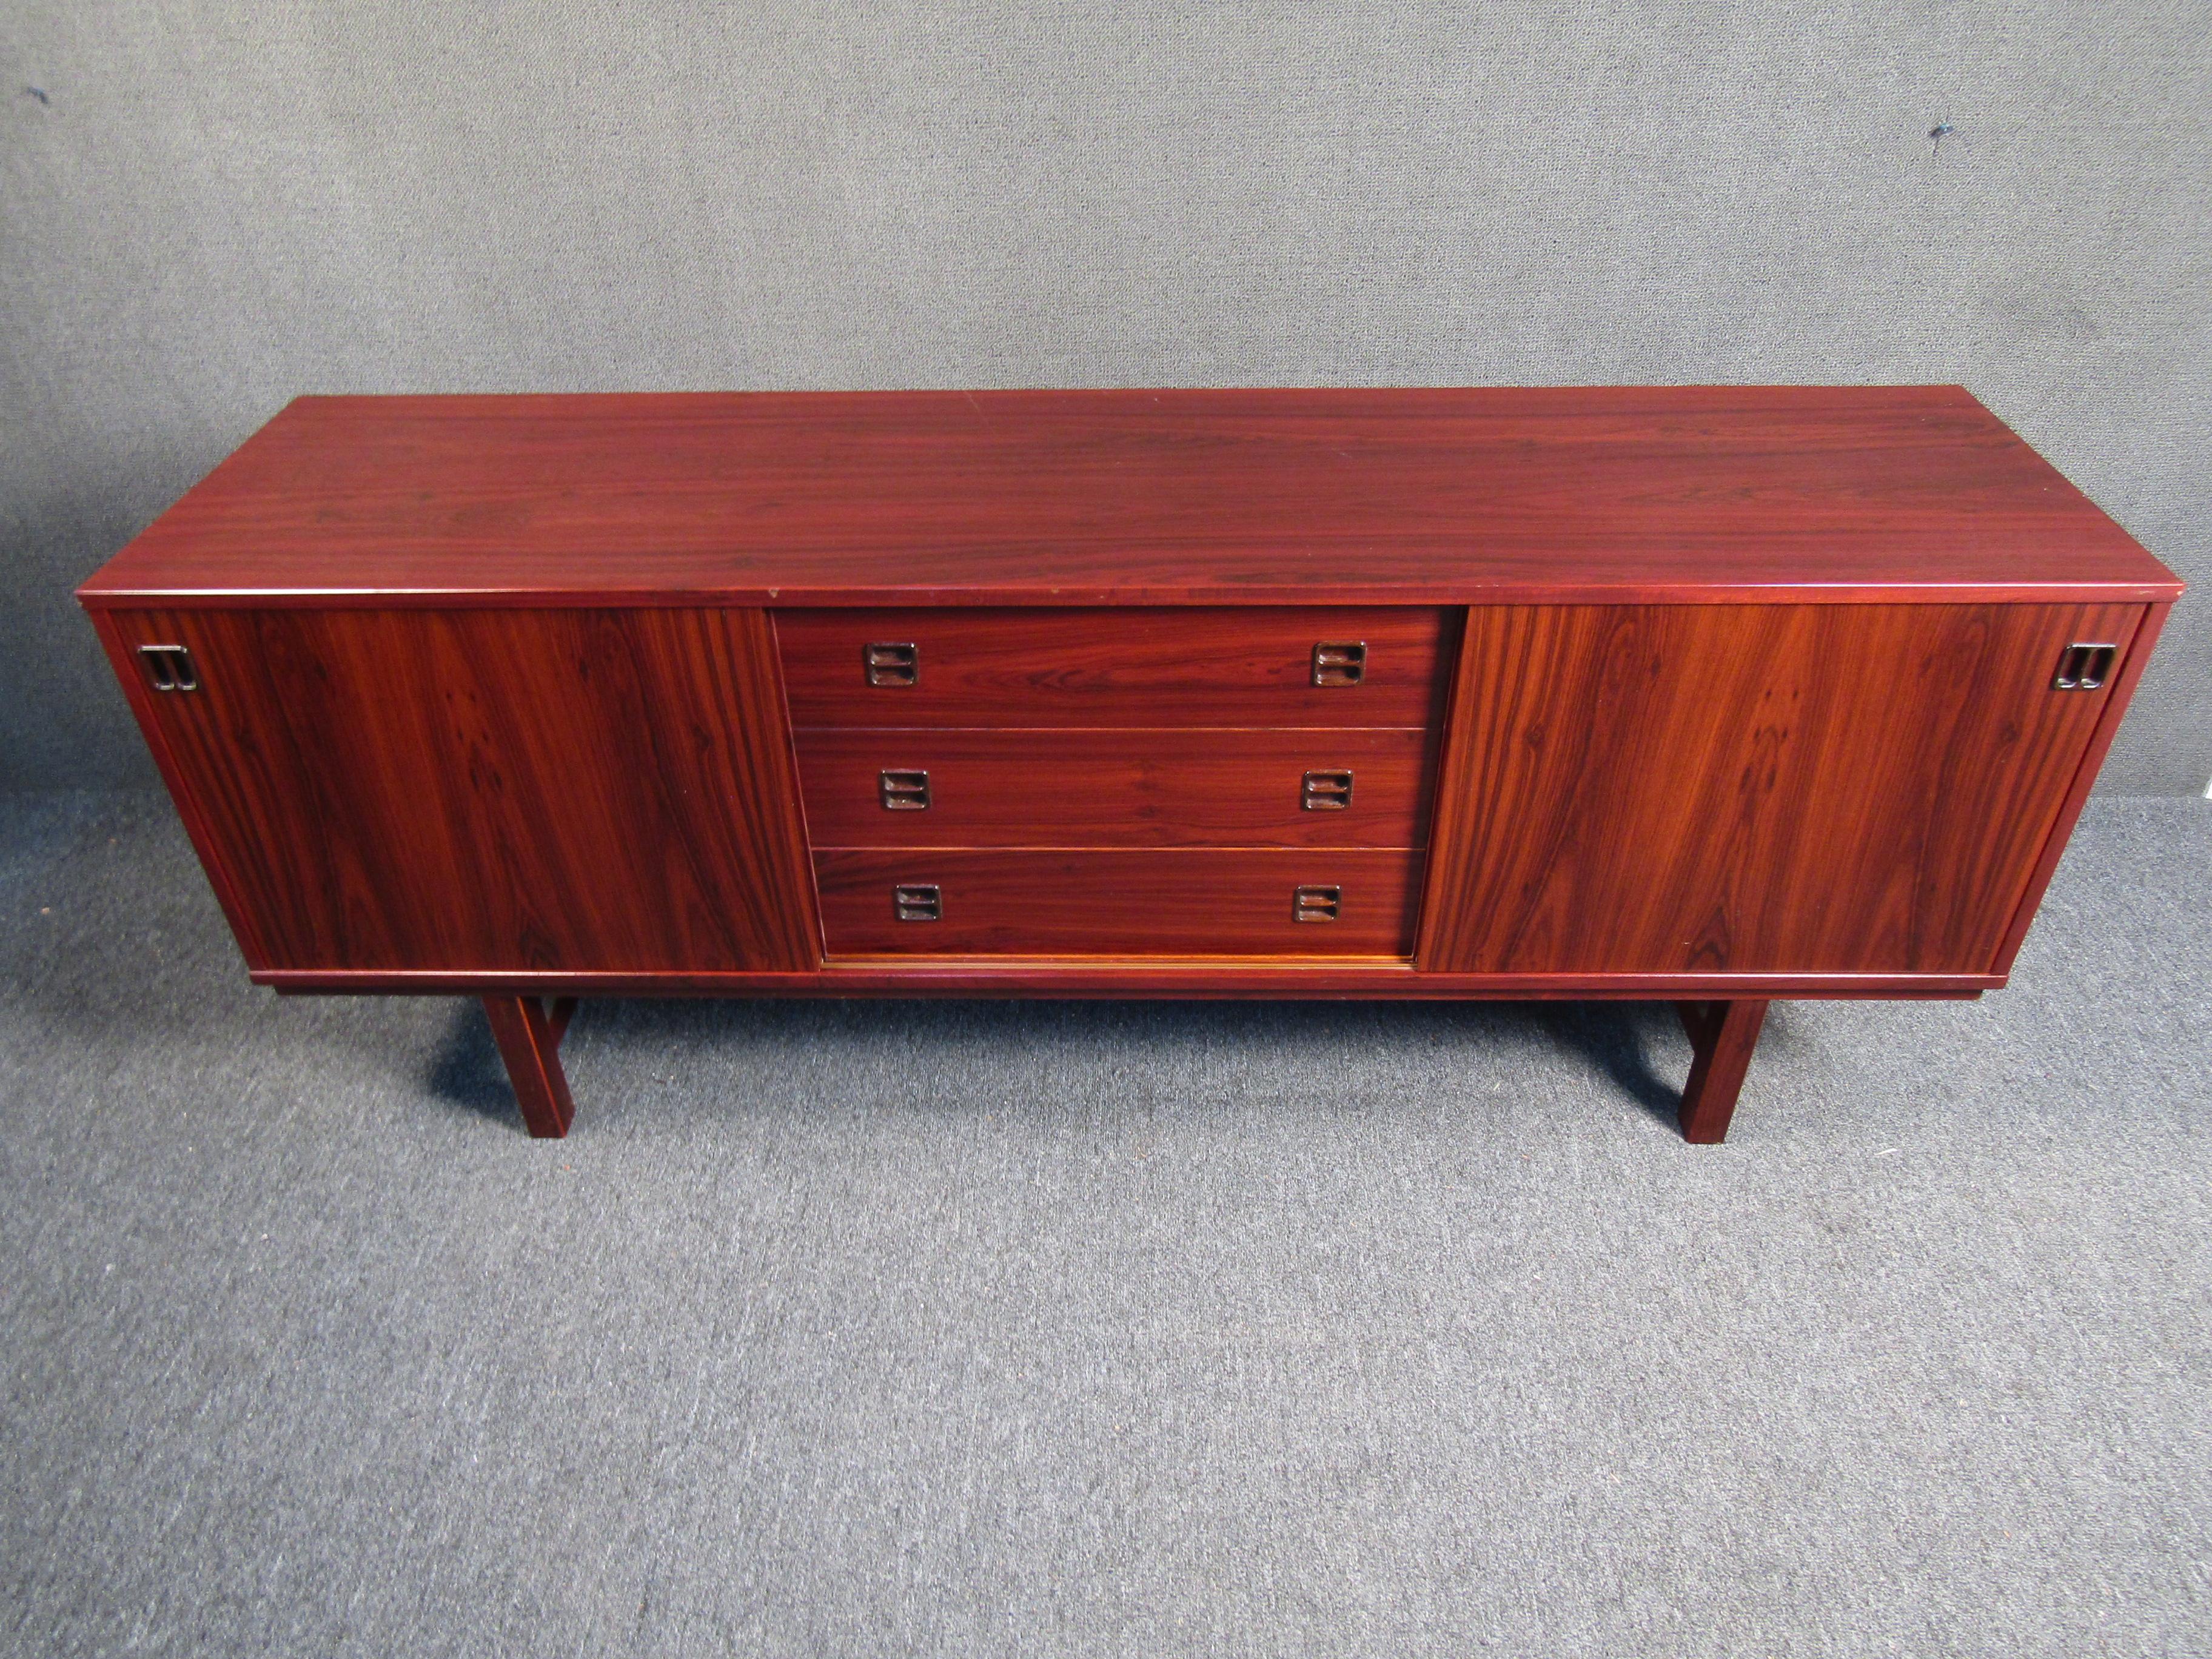 Vintage Modern Danish Rosewood Credenza In Good Condition For Sale In Brooklyn, NY